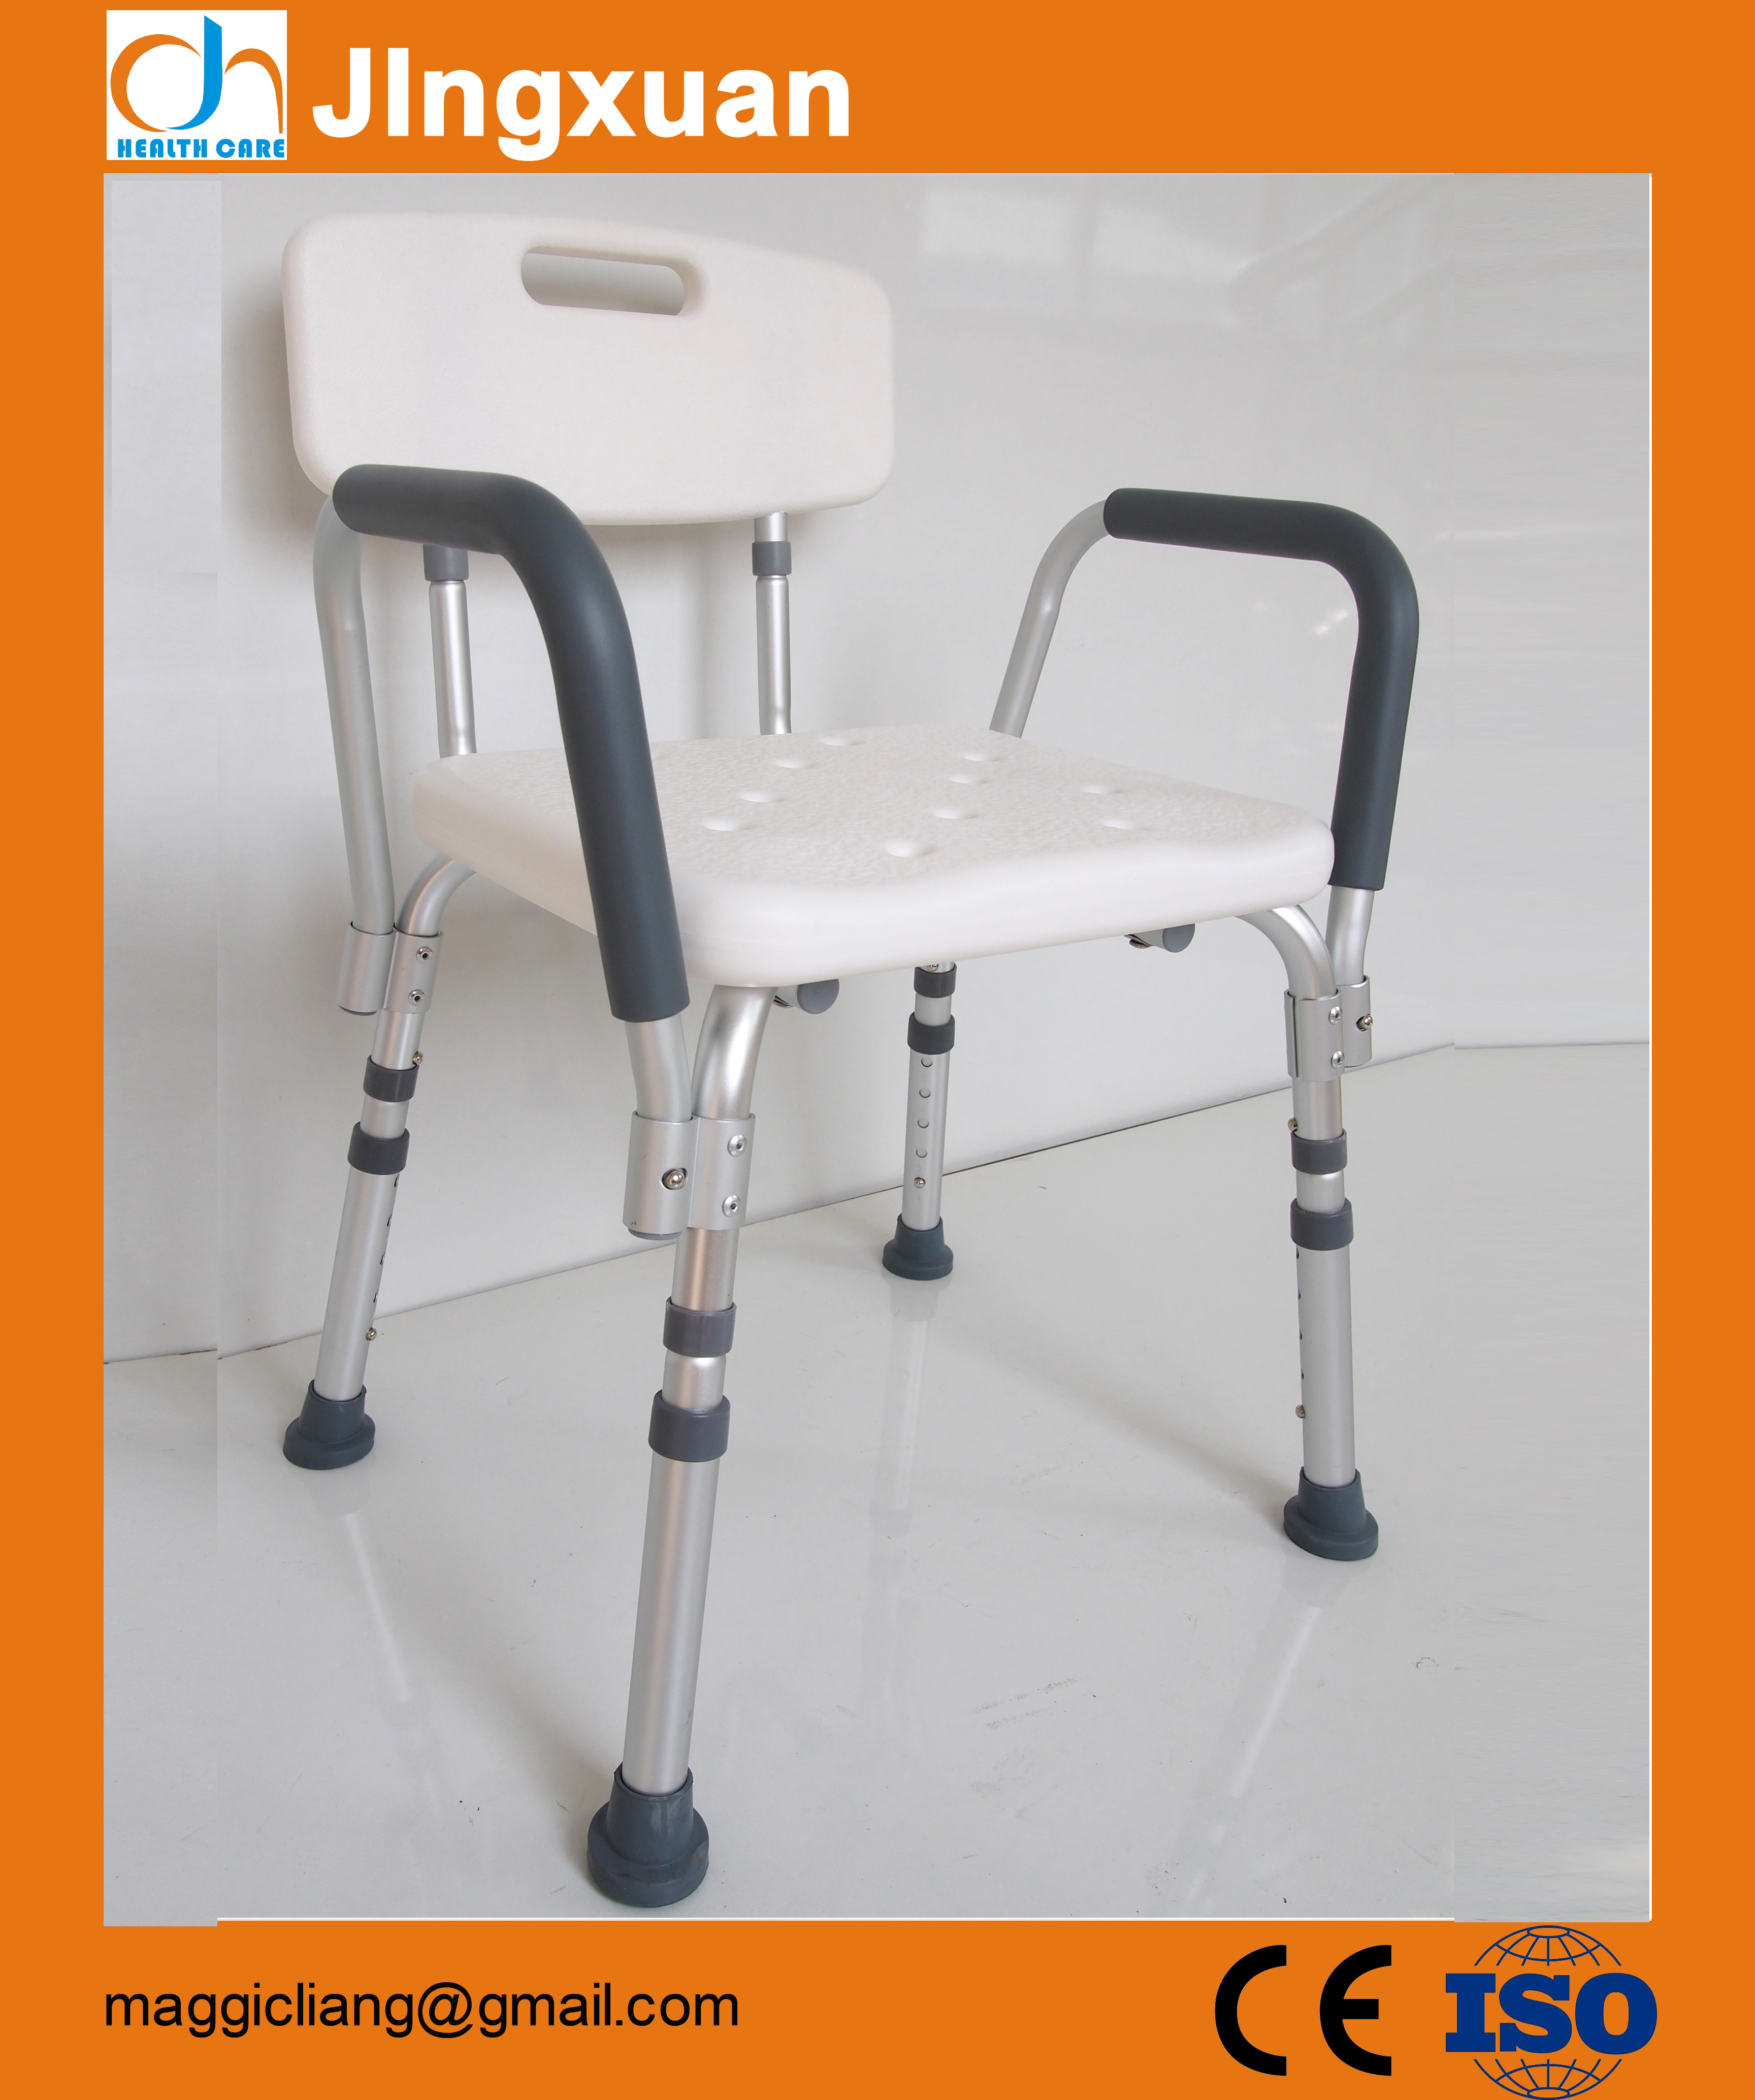 Quality Shower chair with handle, Shower bench, Bath chair for sale